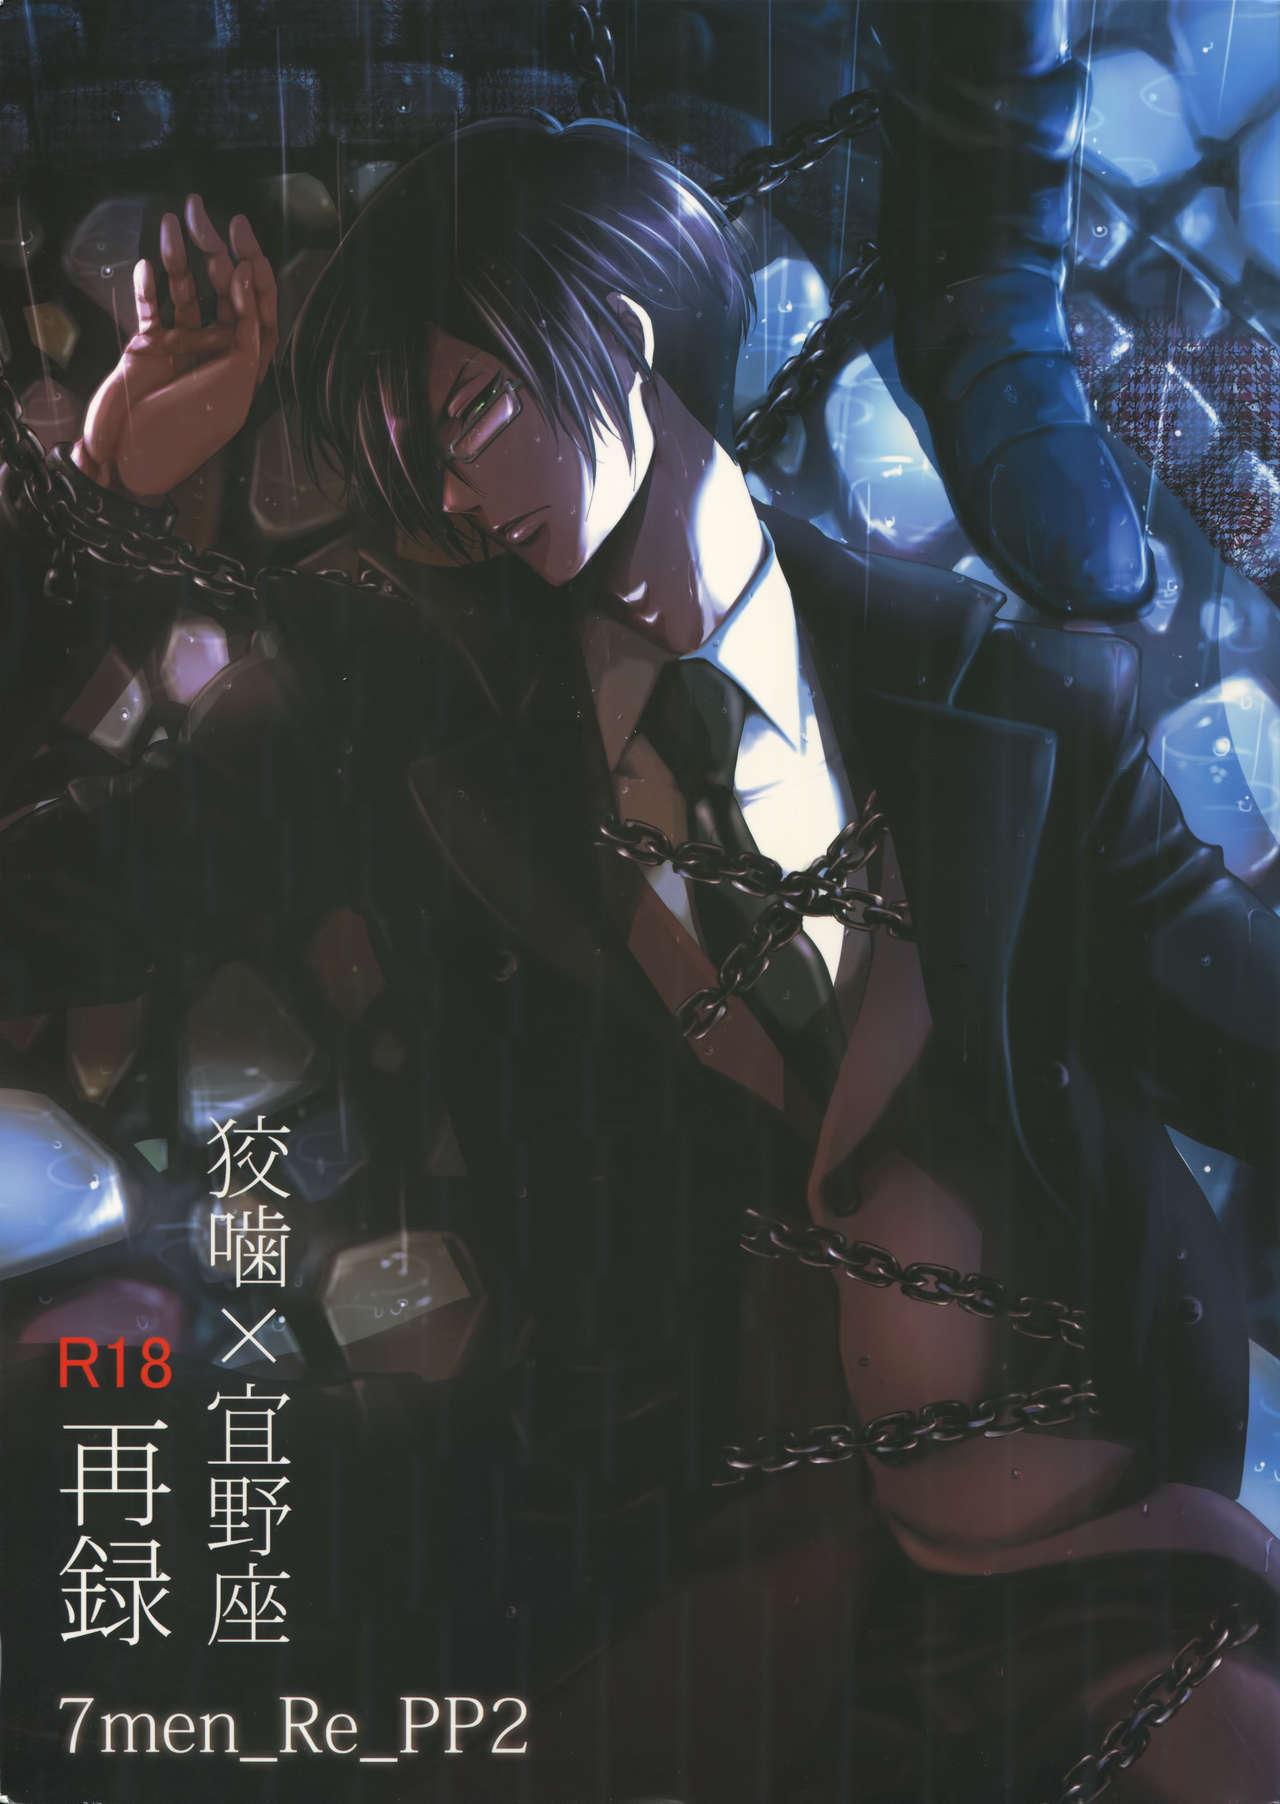 Hard Fucking 7men_Re_PP2 - Psycho pass Roughsex - Picture 1